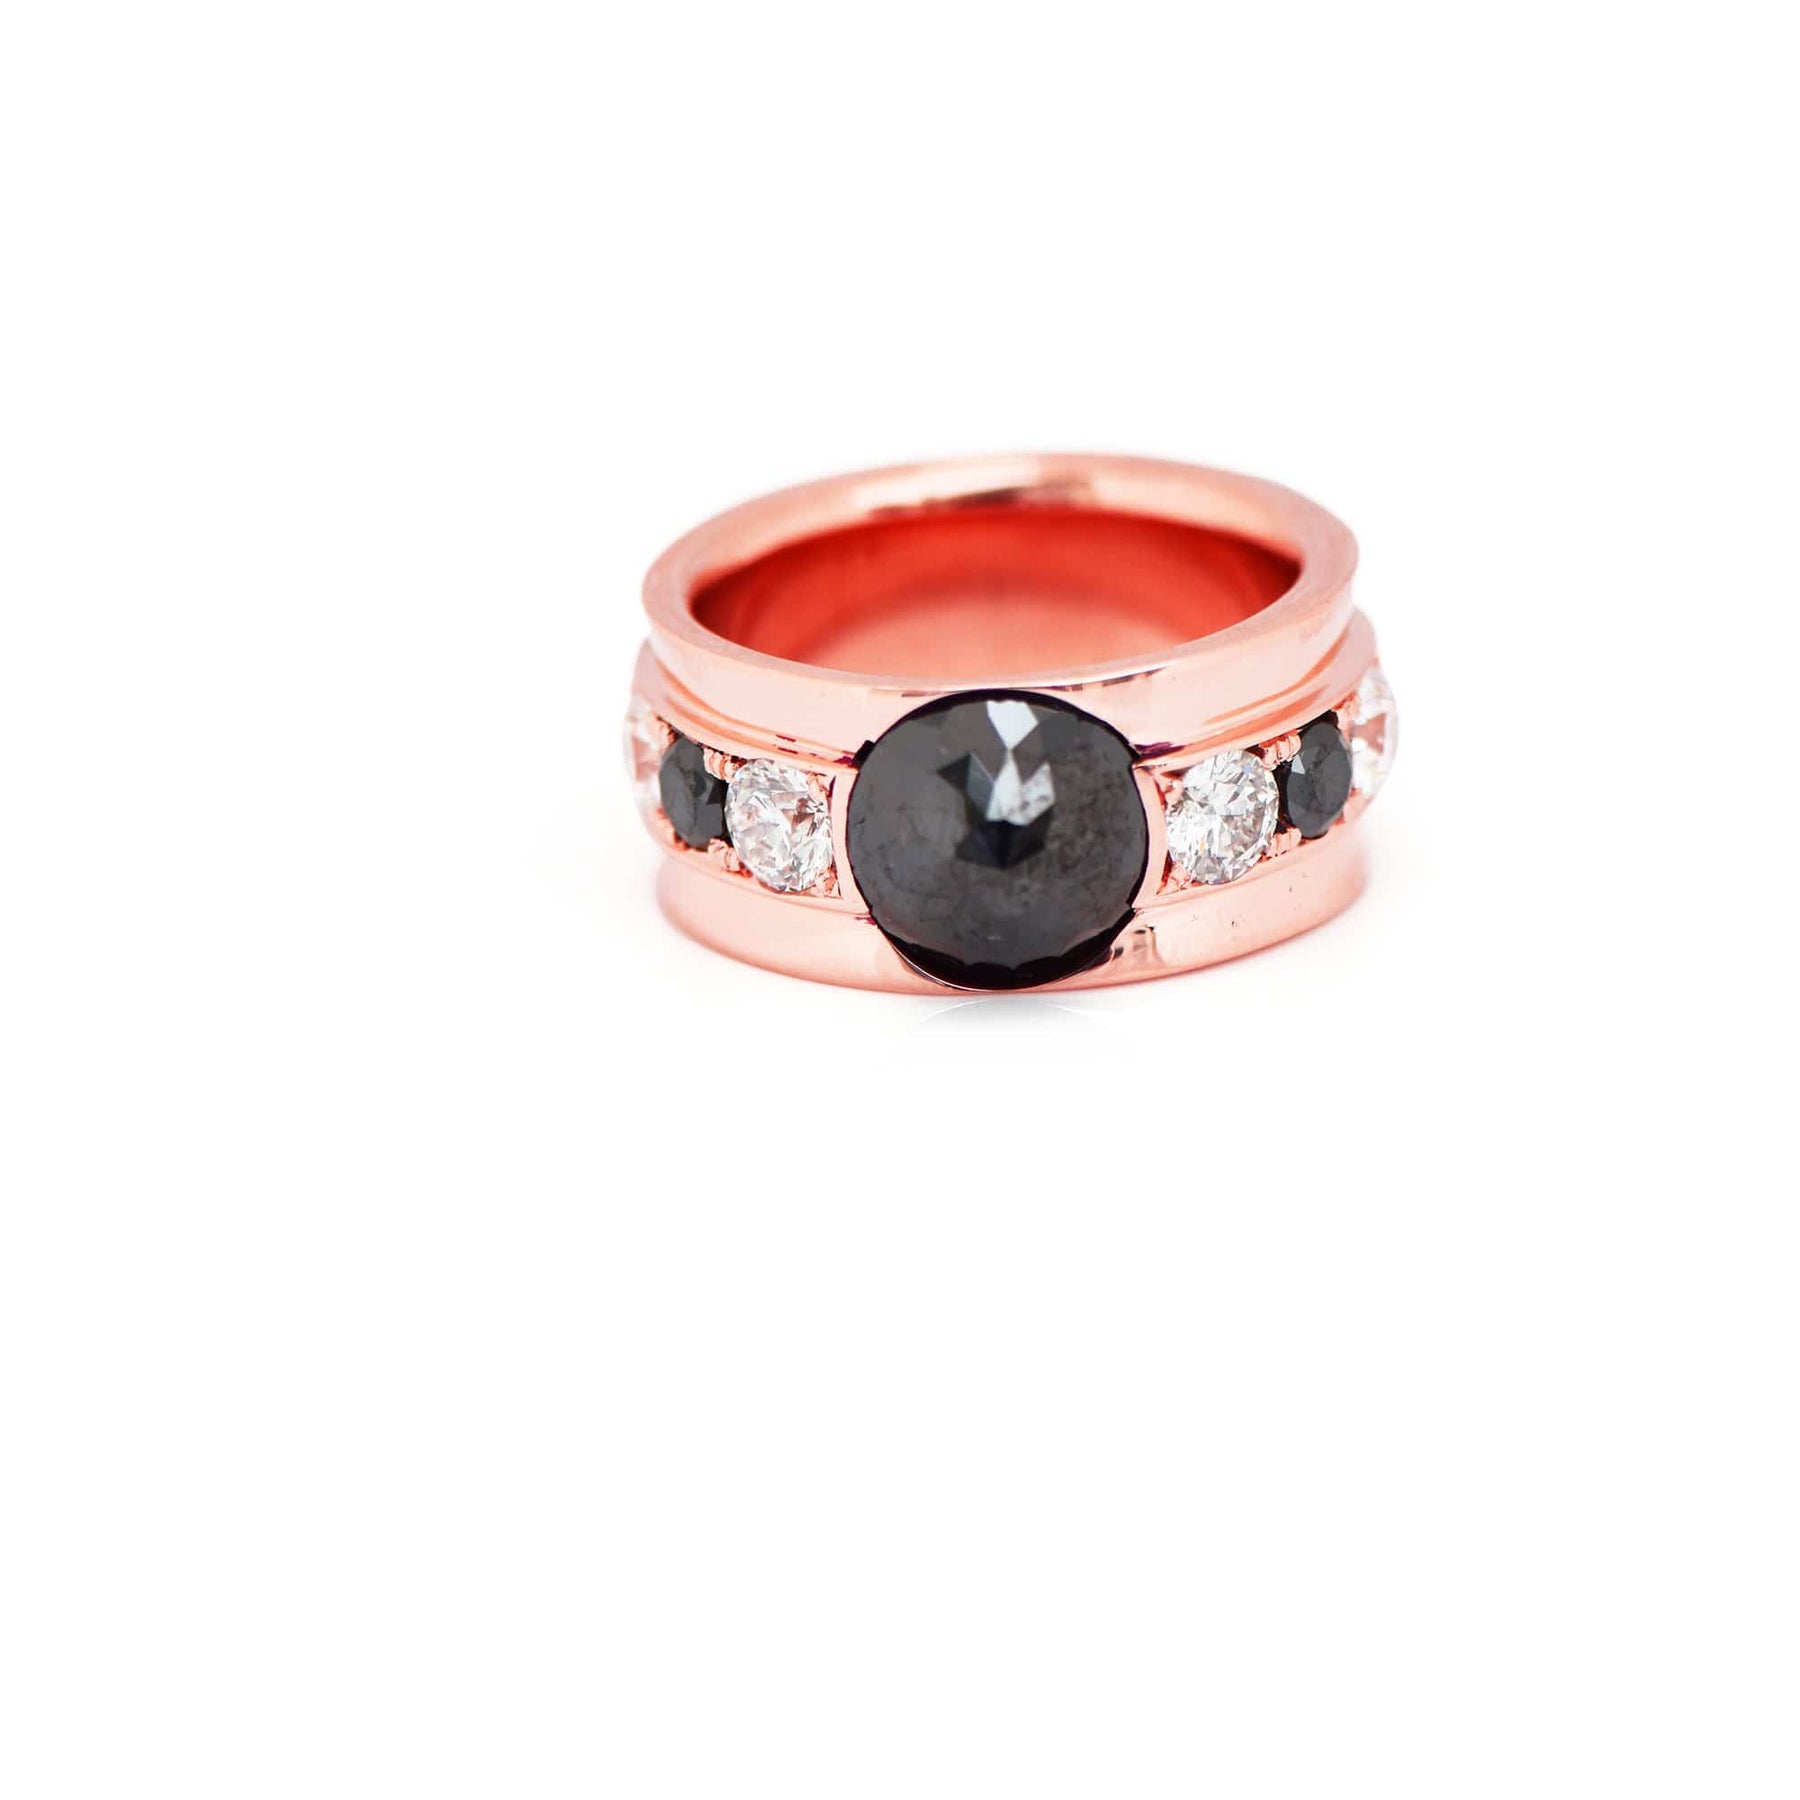 4.00 Carats Black and White Diamond Ring - Chris Aire Fine Jewelry & Timepieces